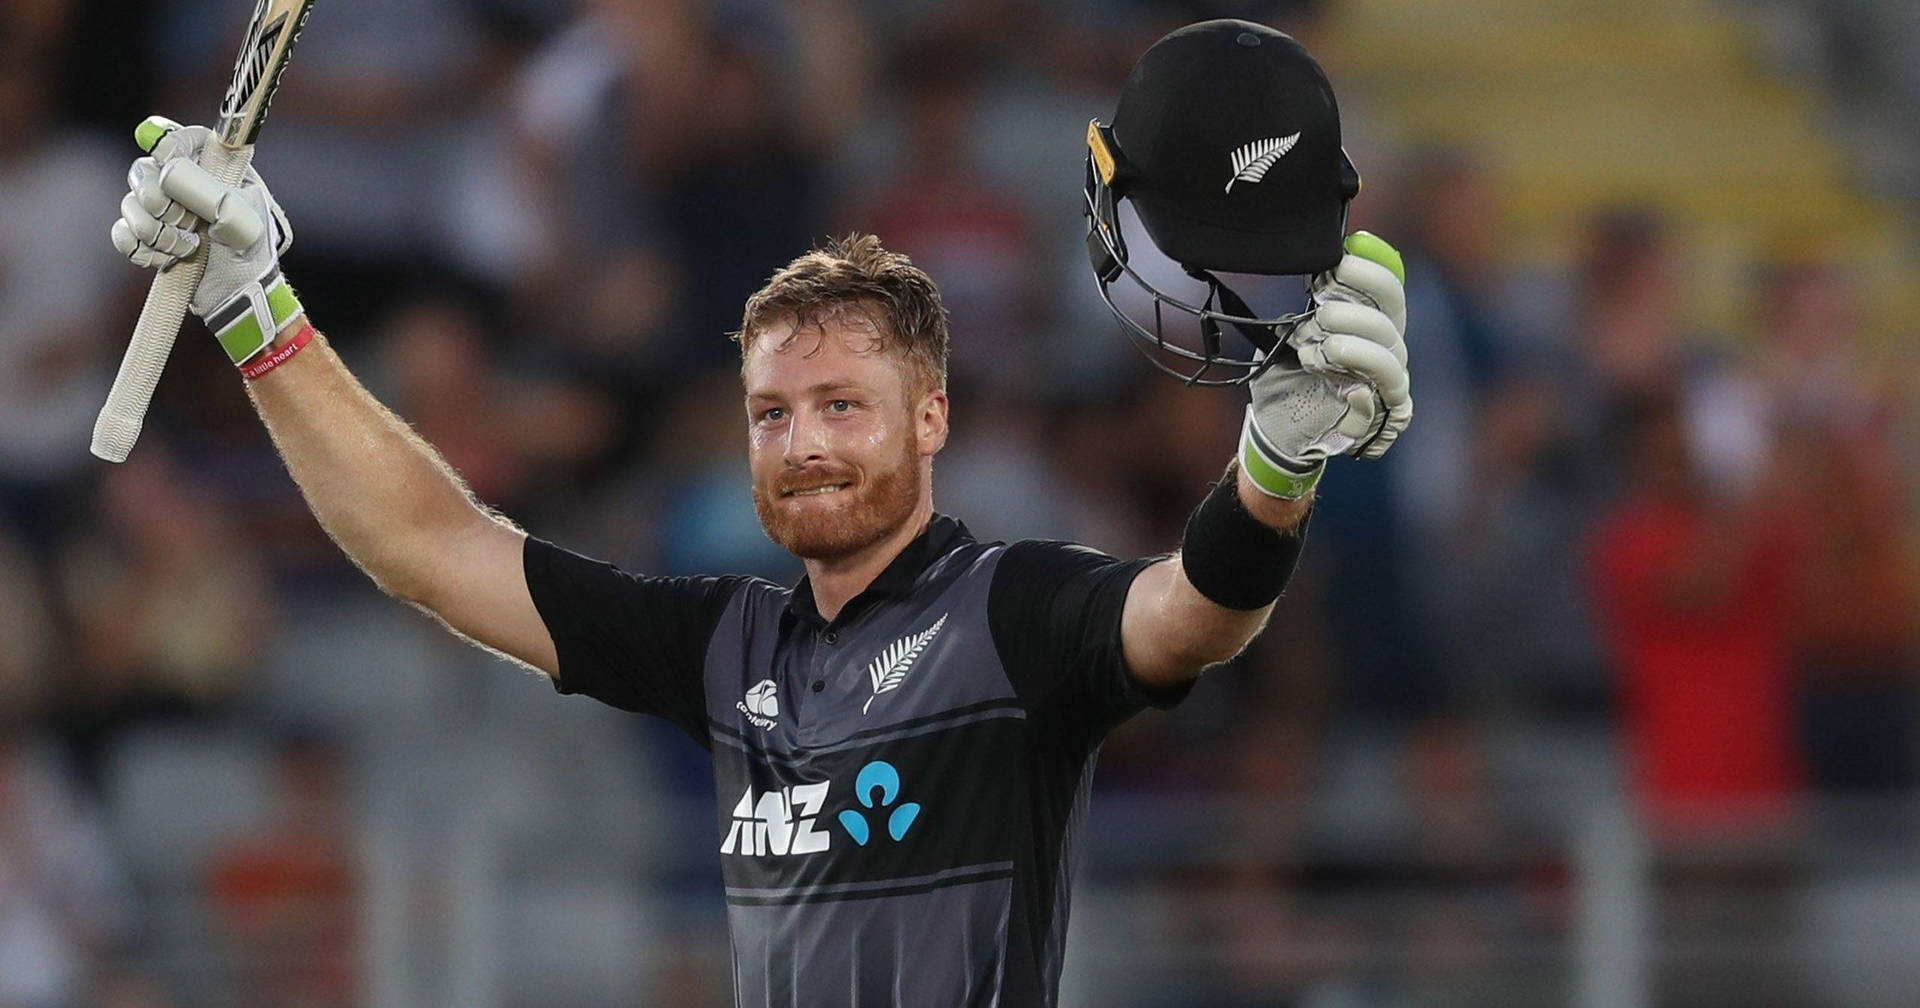 Martinguptill Öppnar Armarna. (this Sentence Could Be Used As A Description For A Wallpaper Featuring Martin Guptill With His Arms Open.) Wallpaper